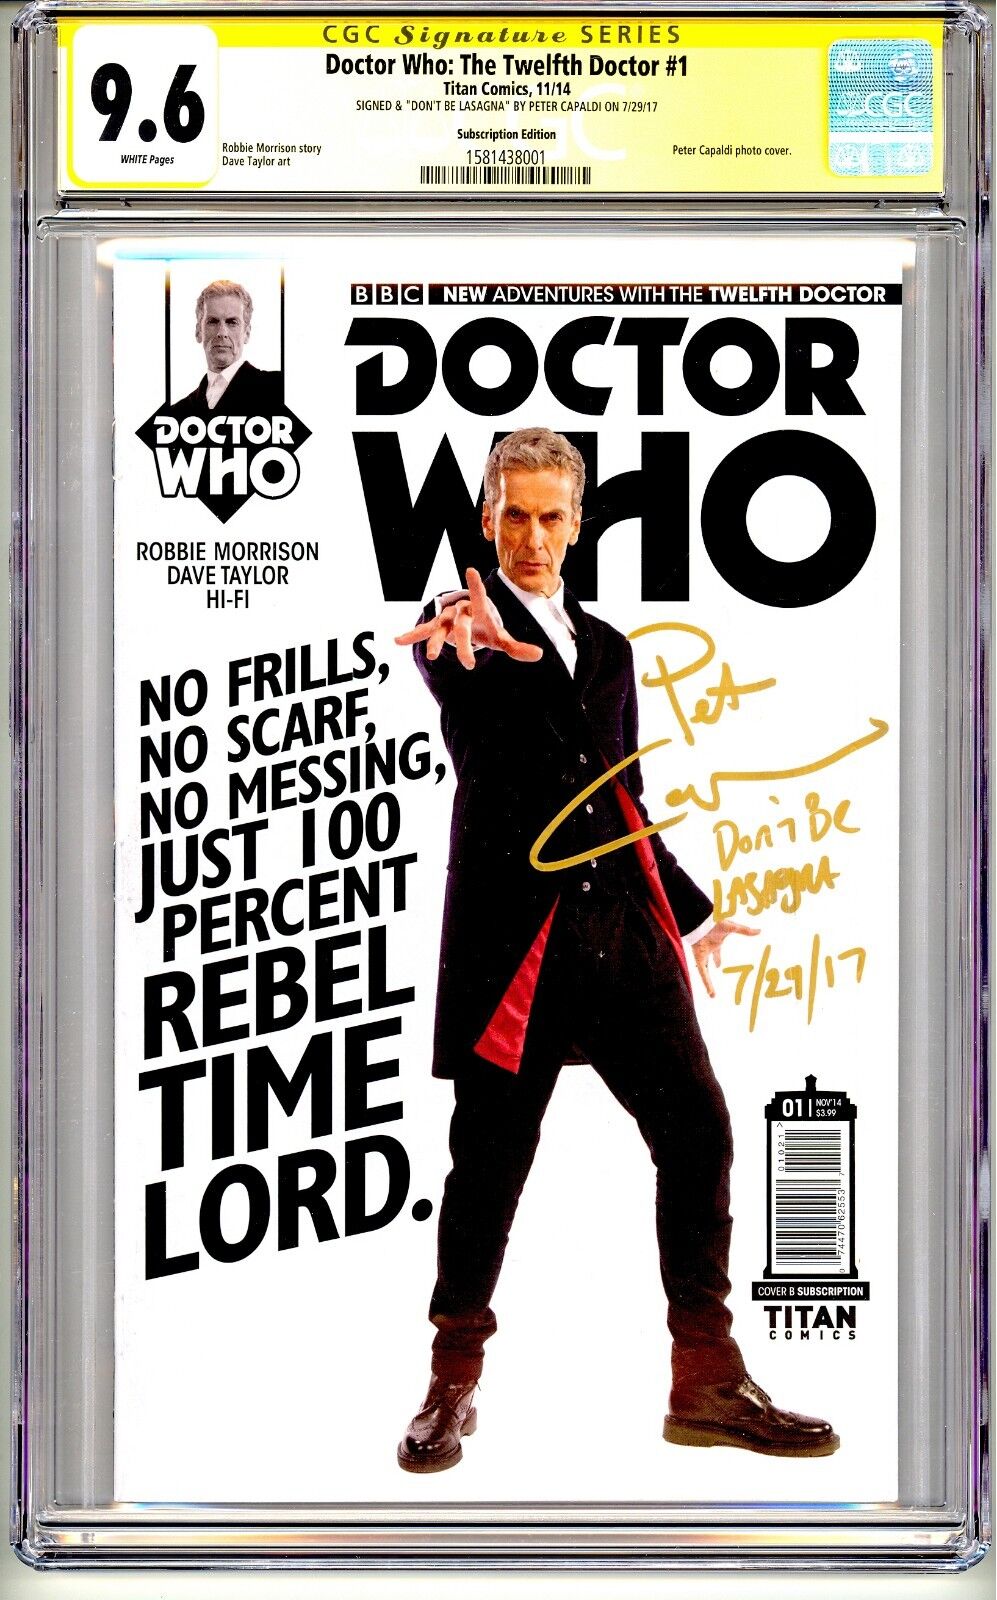 DR. WHO THE TWELFTH DOCTOR #1 CGC SS PHOTO COVER QUOTE COMMENT REMARK RARE